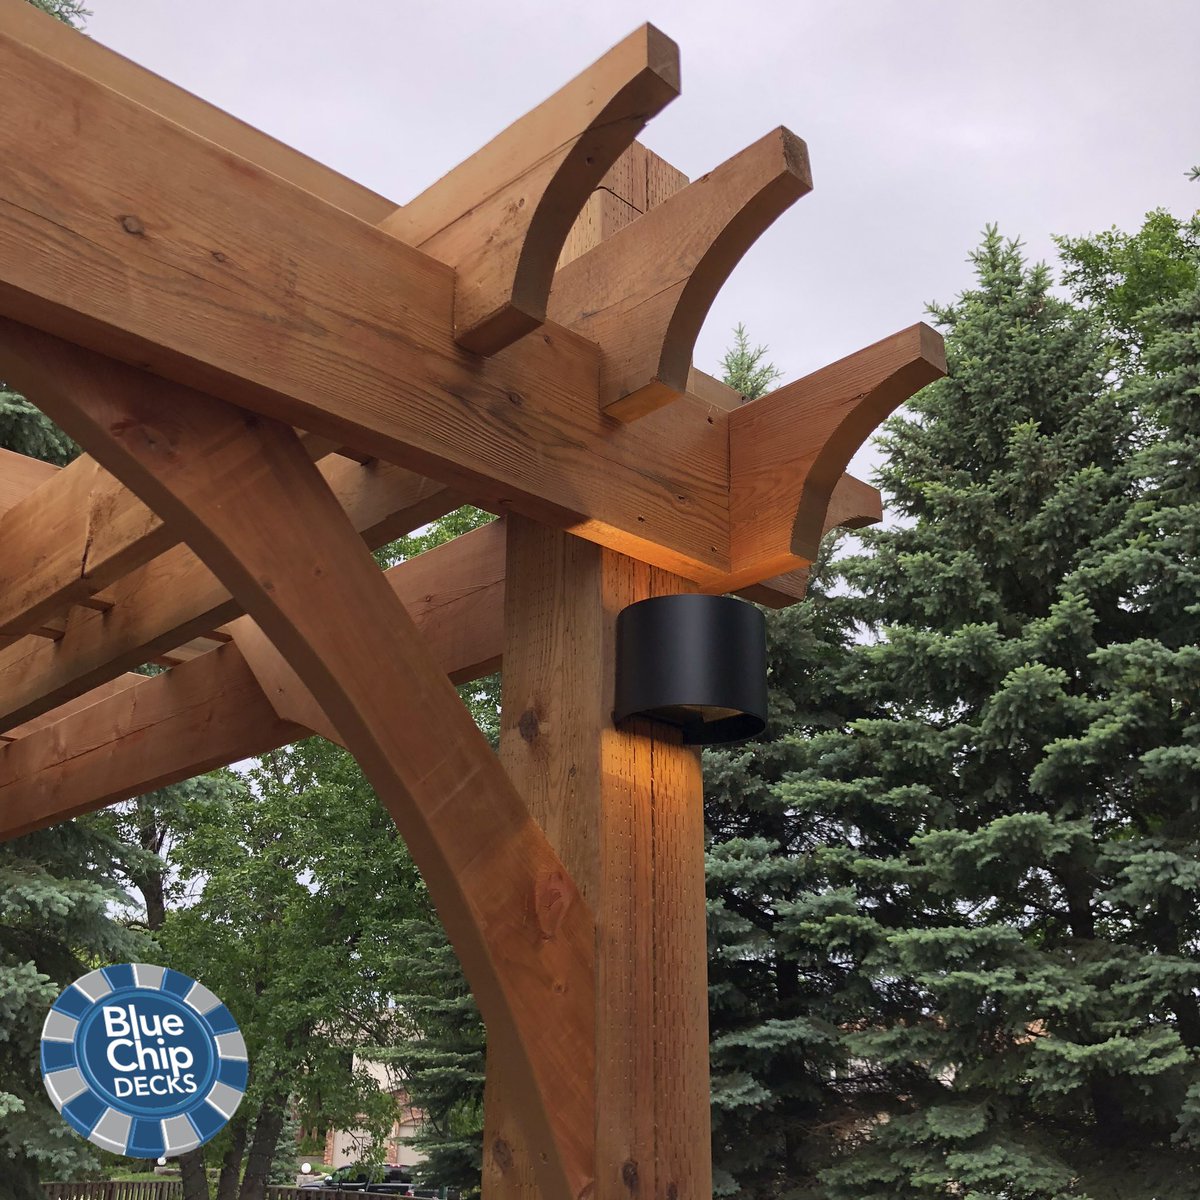 It’s All In The Details!
.
.
Check out the killer details on this pergola end. Lit up nicely with some @inlitedesign LED Halo lights.
.
.
✨✨ #bluechipdecks ✨✨
.
.
#wood #woodworking #carpentry #Manitoba #wpg #construction #art #beautiful #pergola #backyard #winnipeg #decks